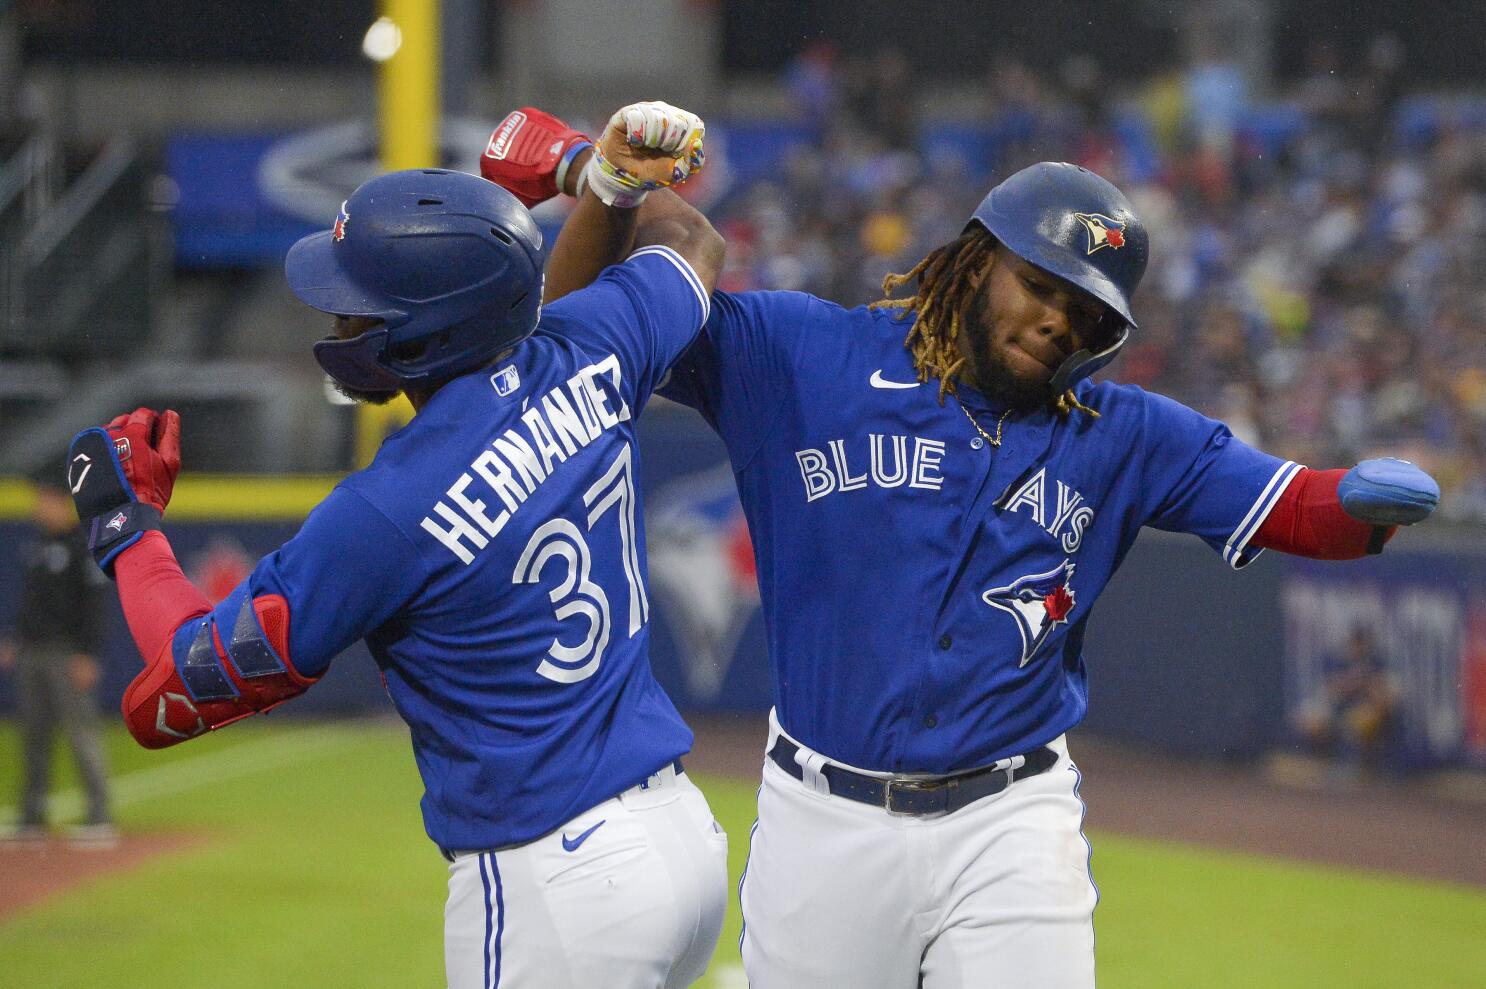 Guerrero hits 2 HRs to reach 30, Blue Jays rout Rangers 10-2 - The